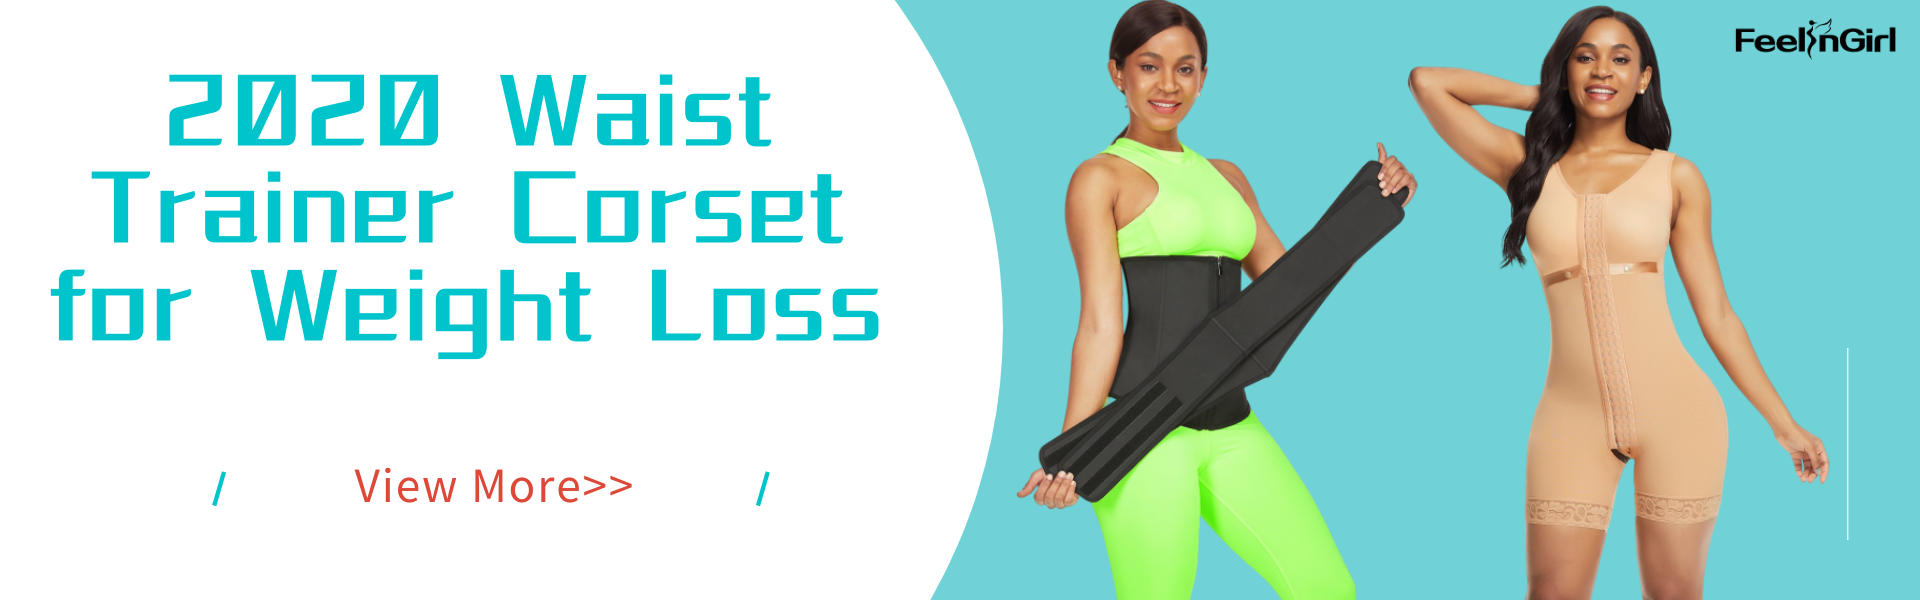 2020 Waist Trainer Corset for Weight Loss